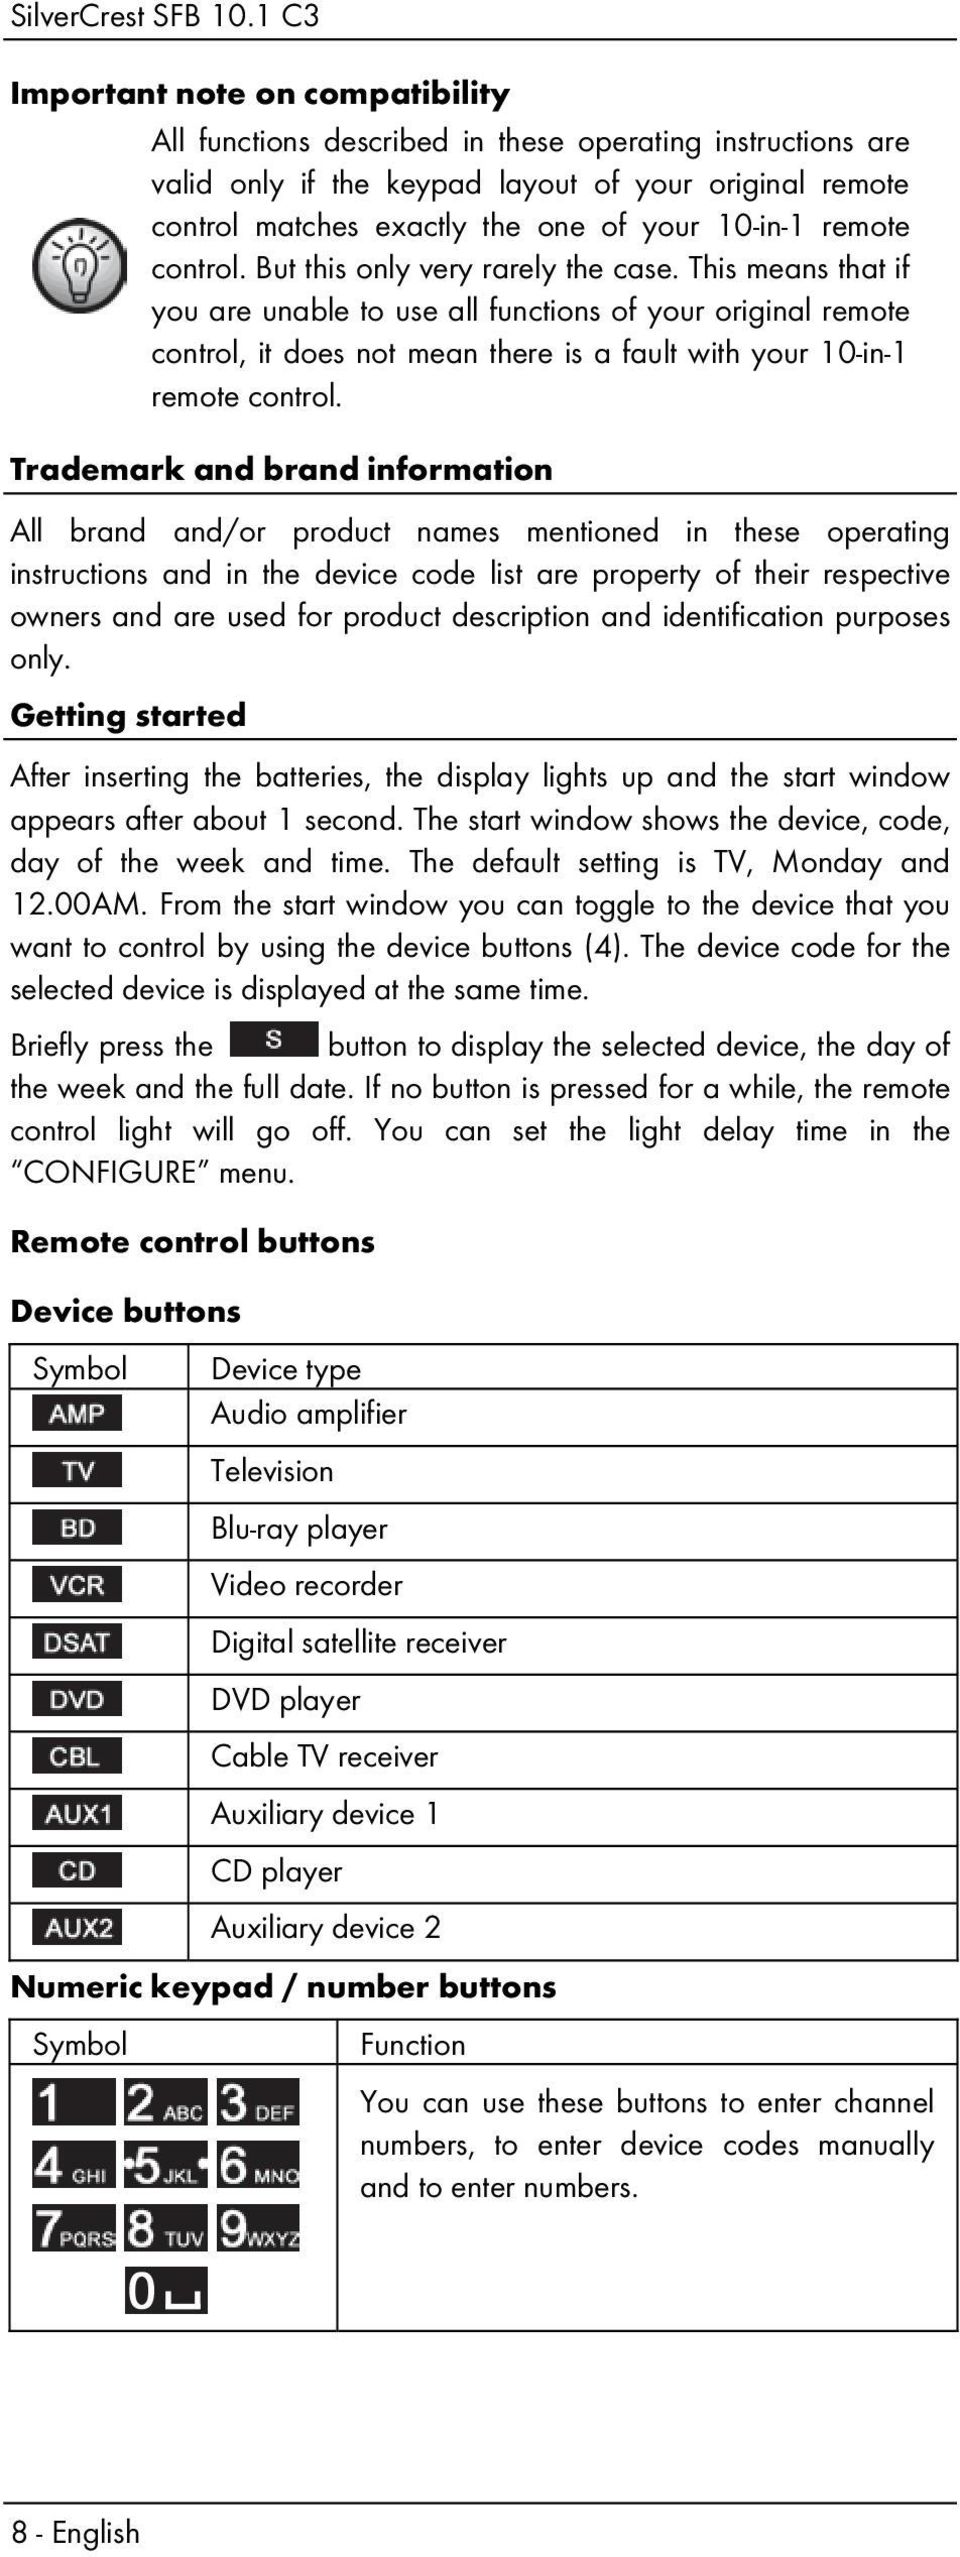 This means that if you are unable to use all functions of your original remote control, it does not mean there is a fault with your 10-in-1 remote control.